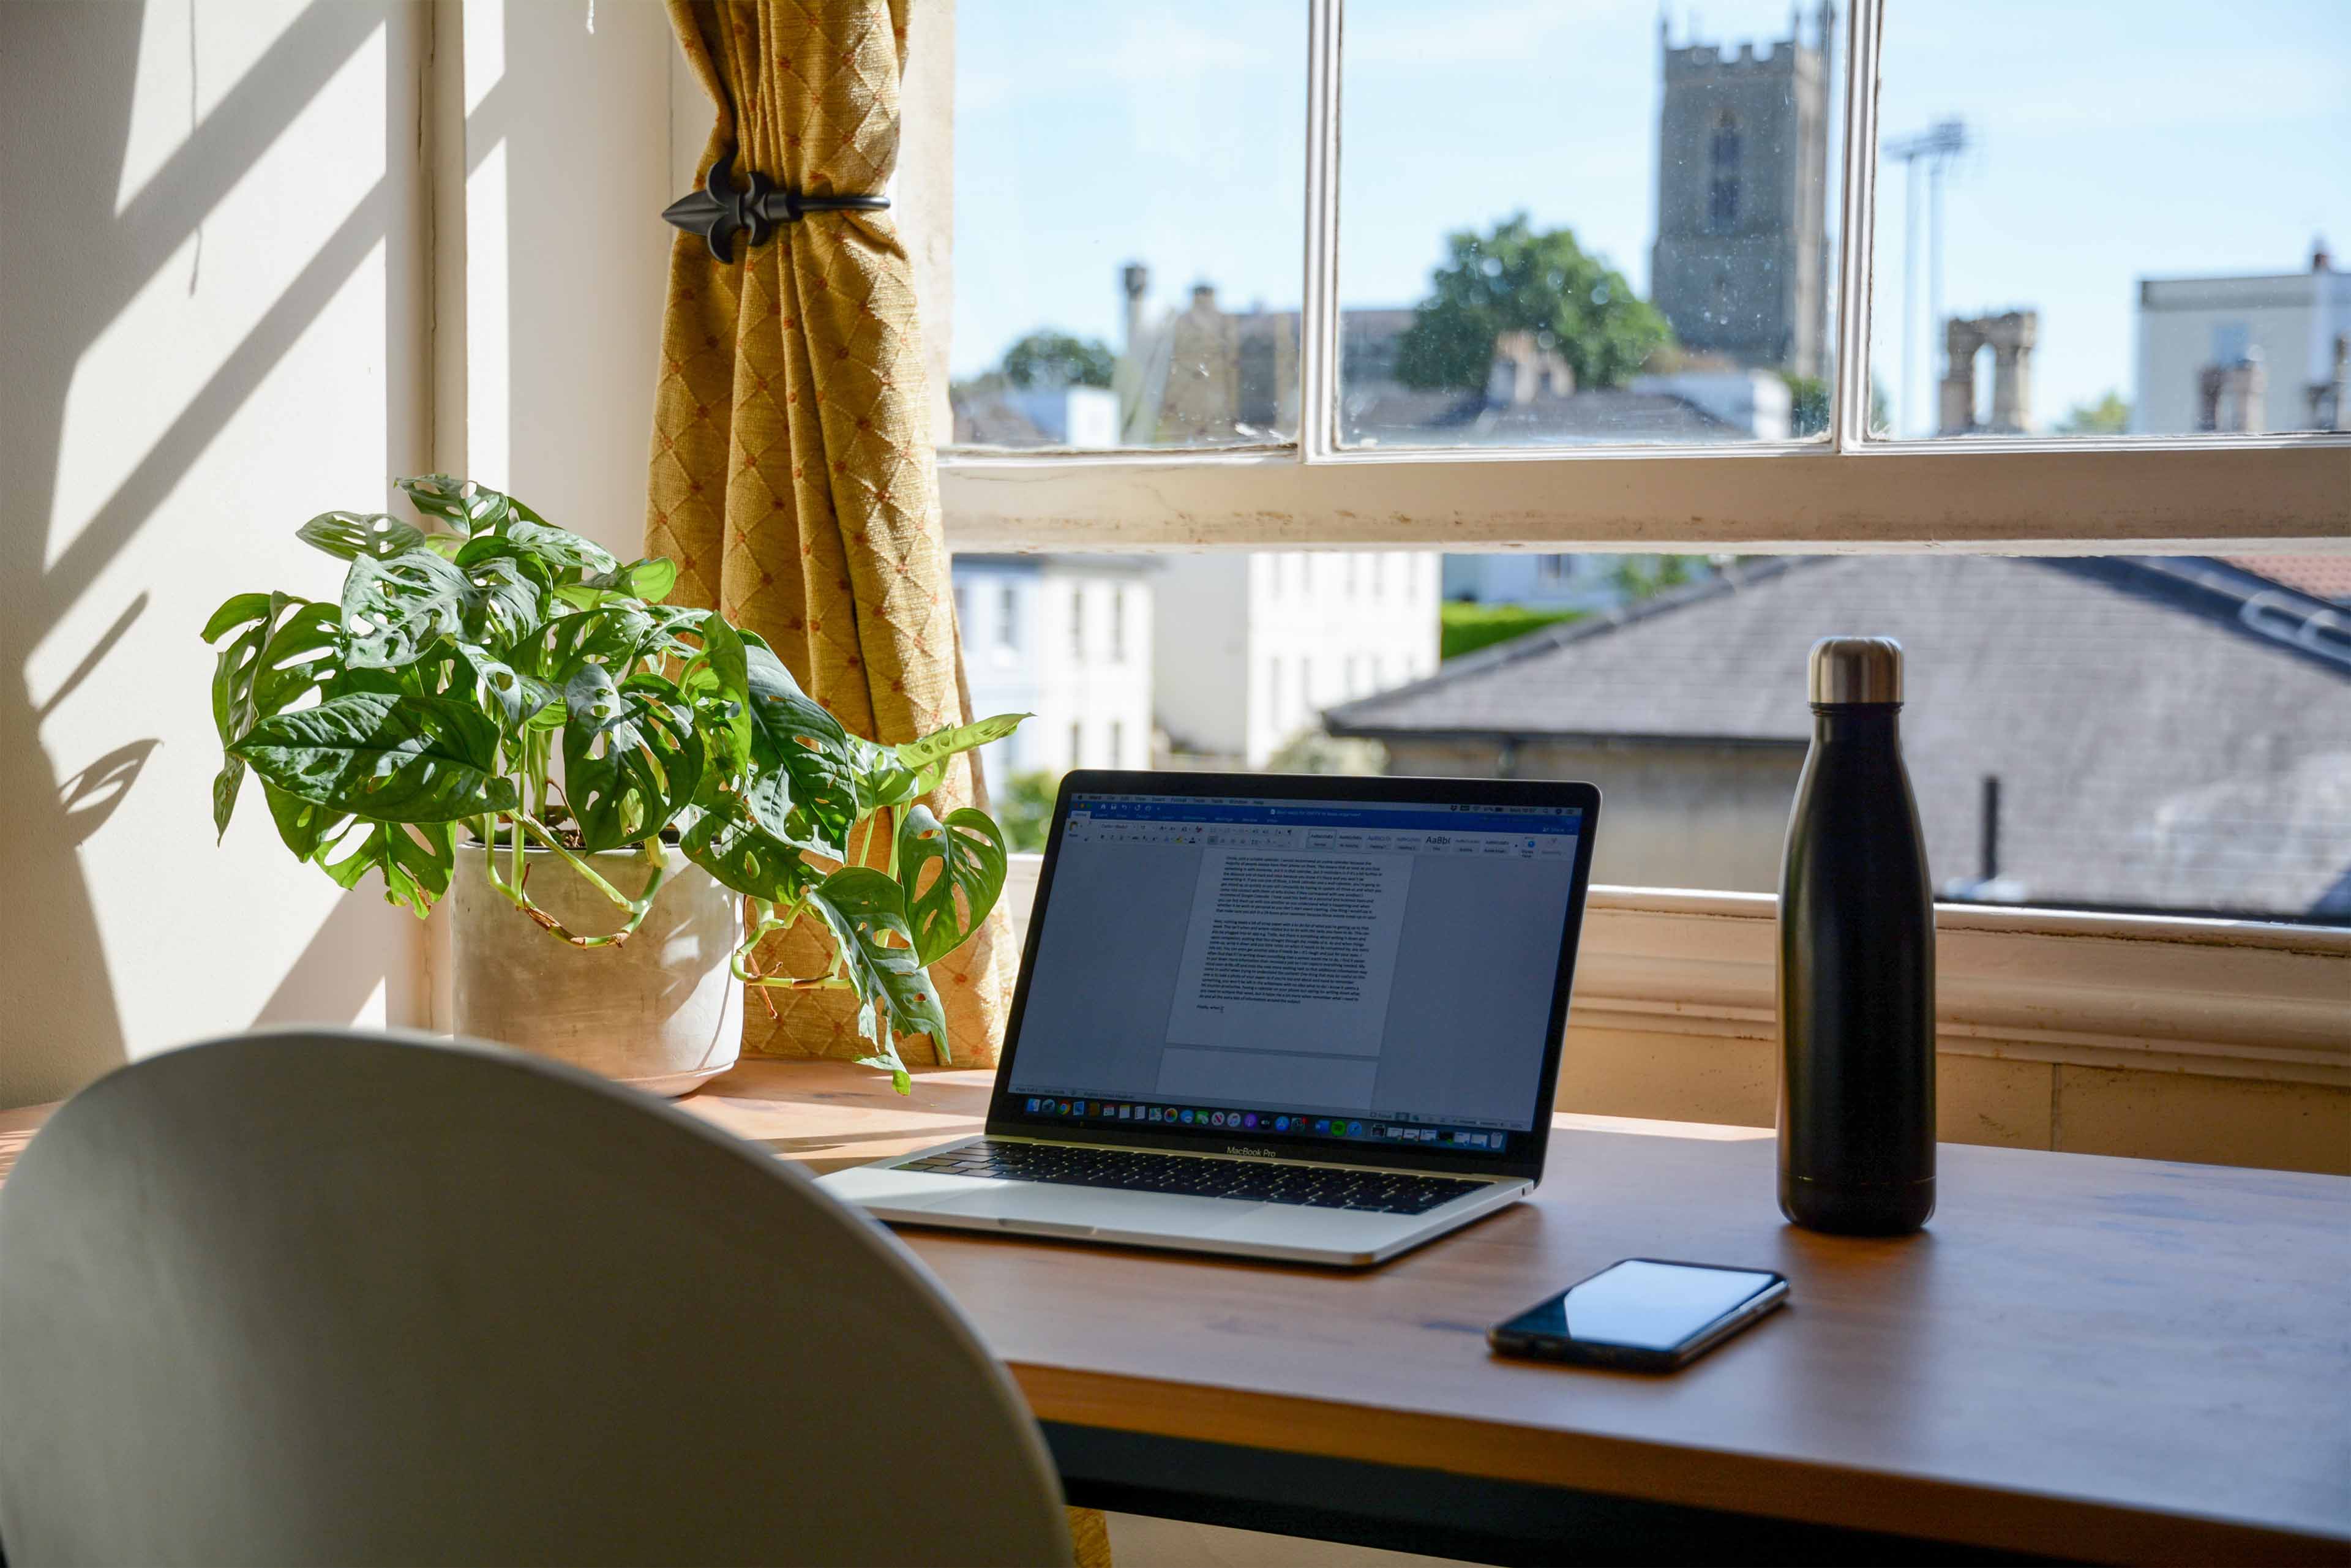 Laptop and plant on desk overlooking a window